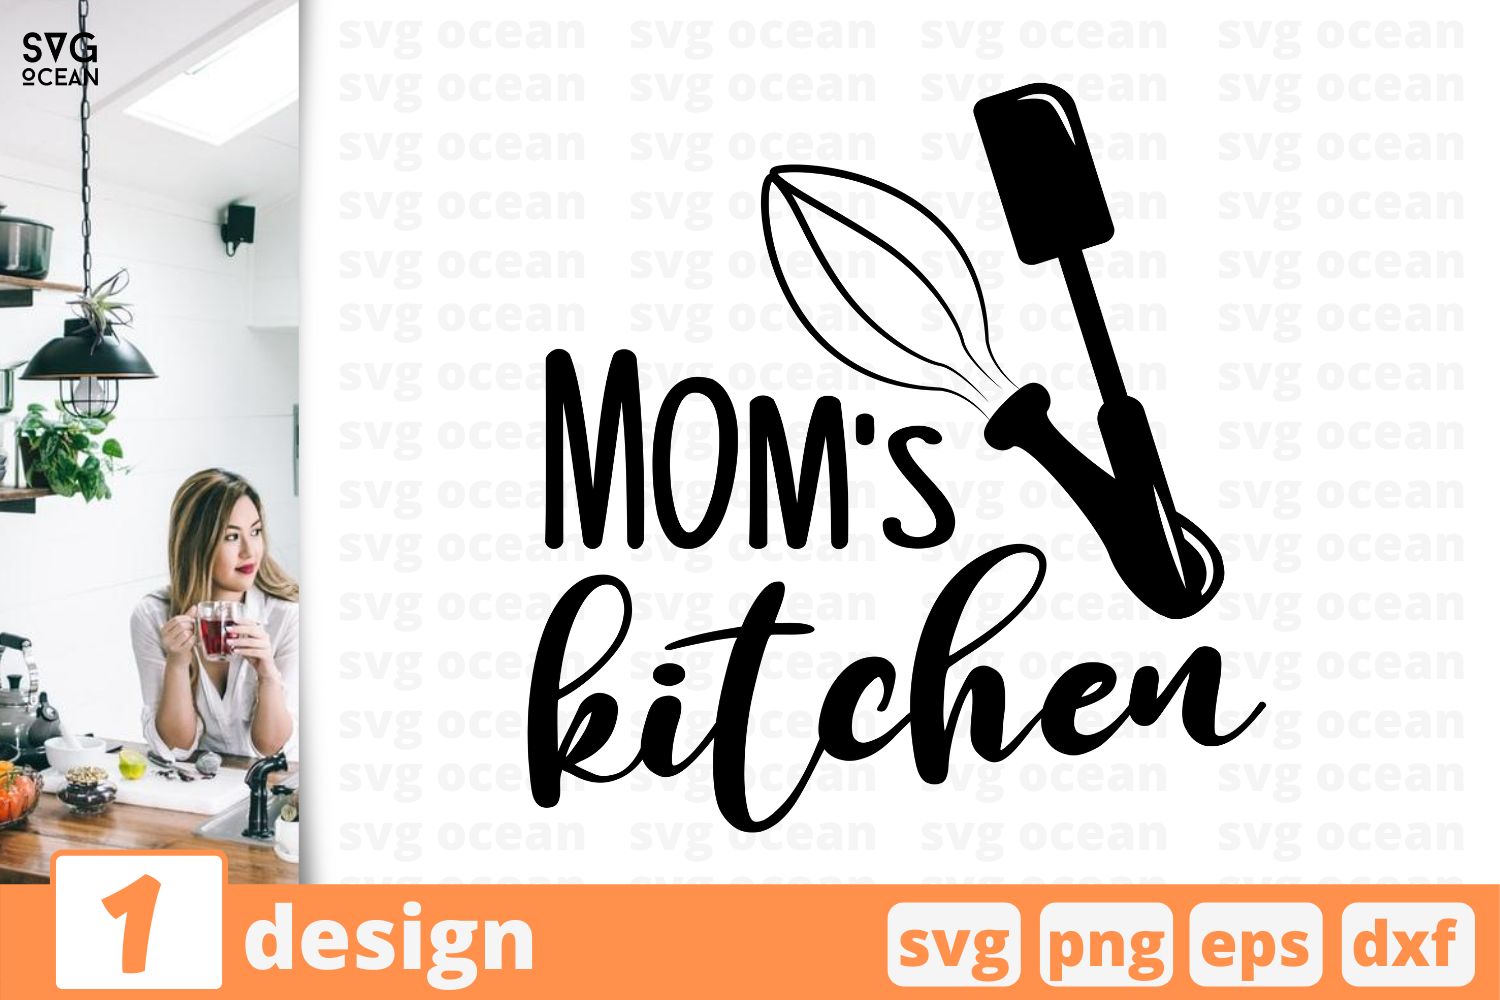 Download 1 Mom S Kitchen Kitchen Quotes Cricut Svg By Svgocean Thehungryjpeg Com